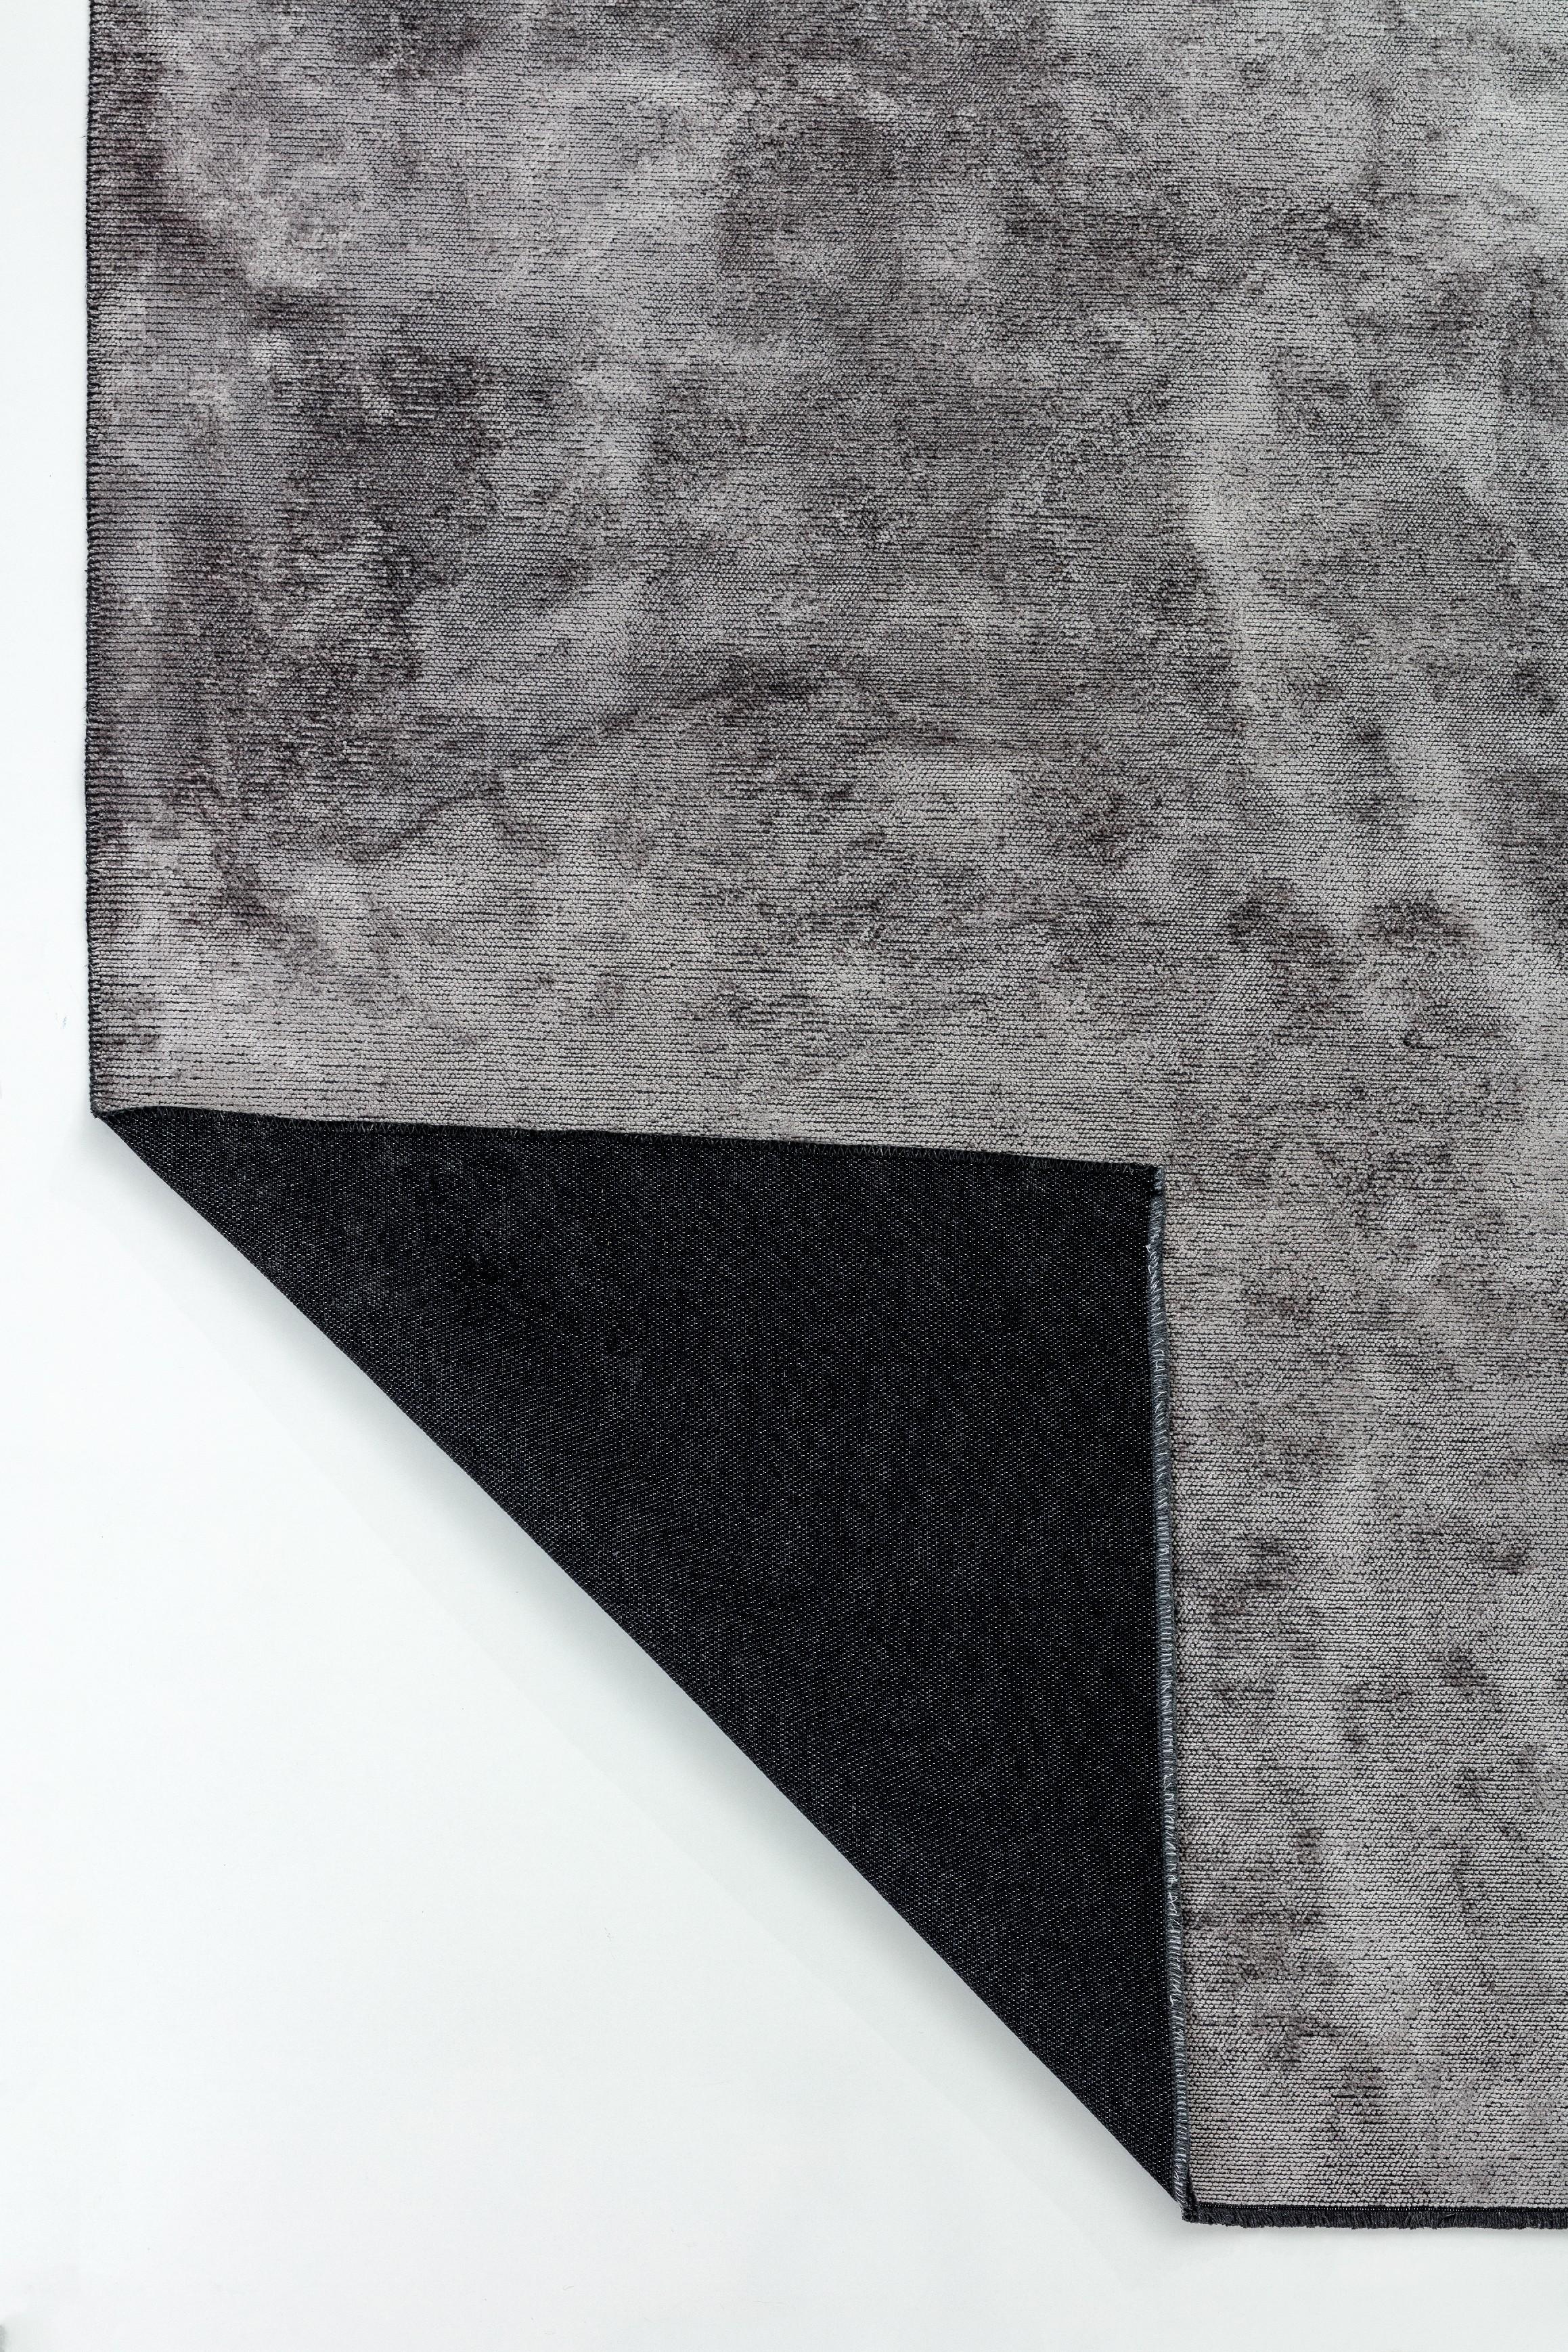 For Sale:  (Gray) Modern Solid Color Luxury Area Rug 3